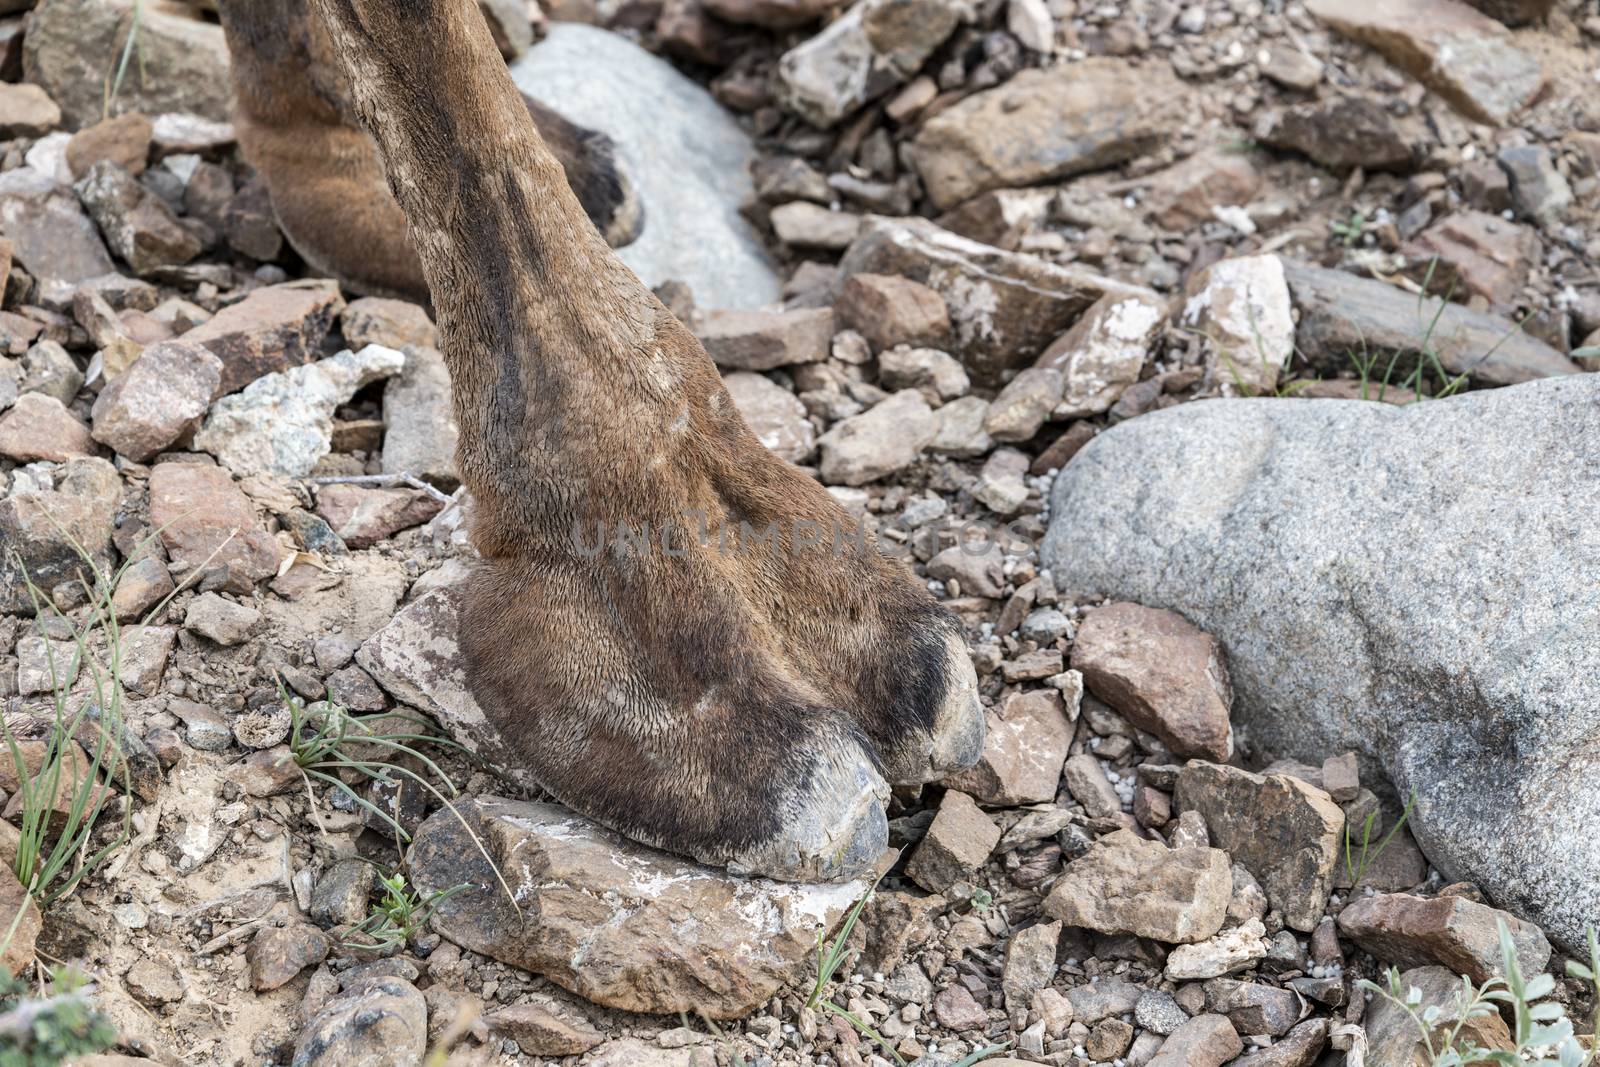 The large, wide feet of Camels are divided in half, and the halves are joined underneath by webbing. Each foot spreads and flattens as the camel puts his weight on it. The pads of a camel’s feet are covered with thick, protective soles.